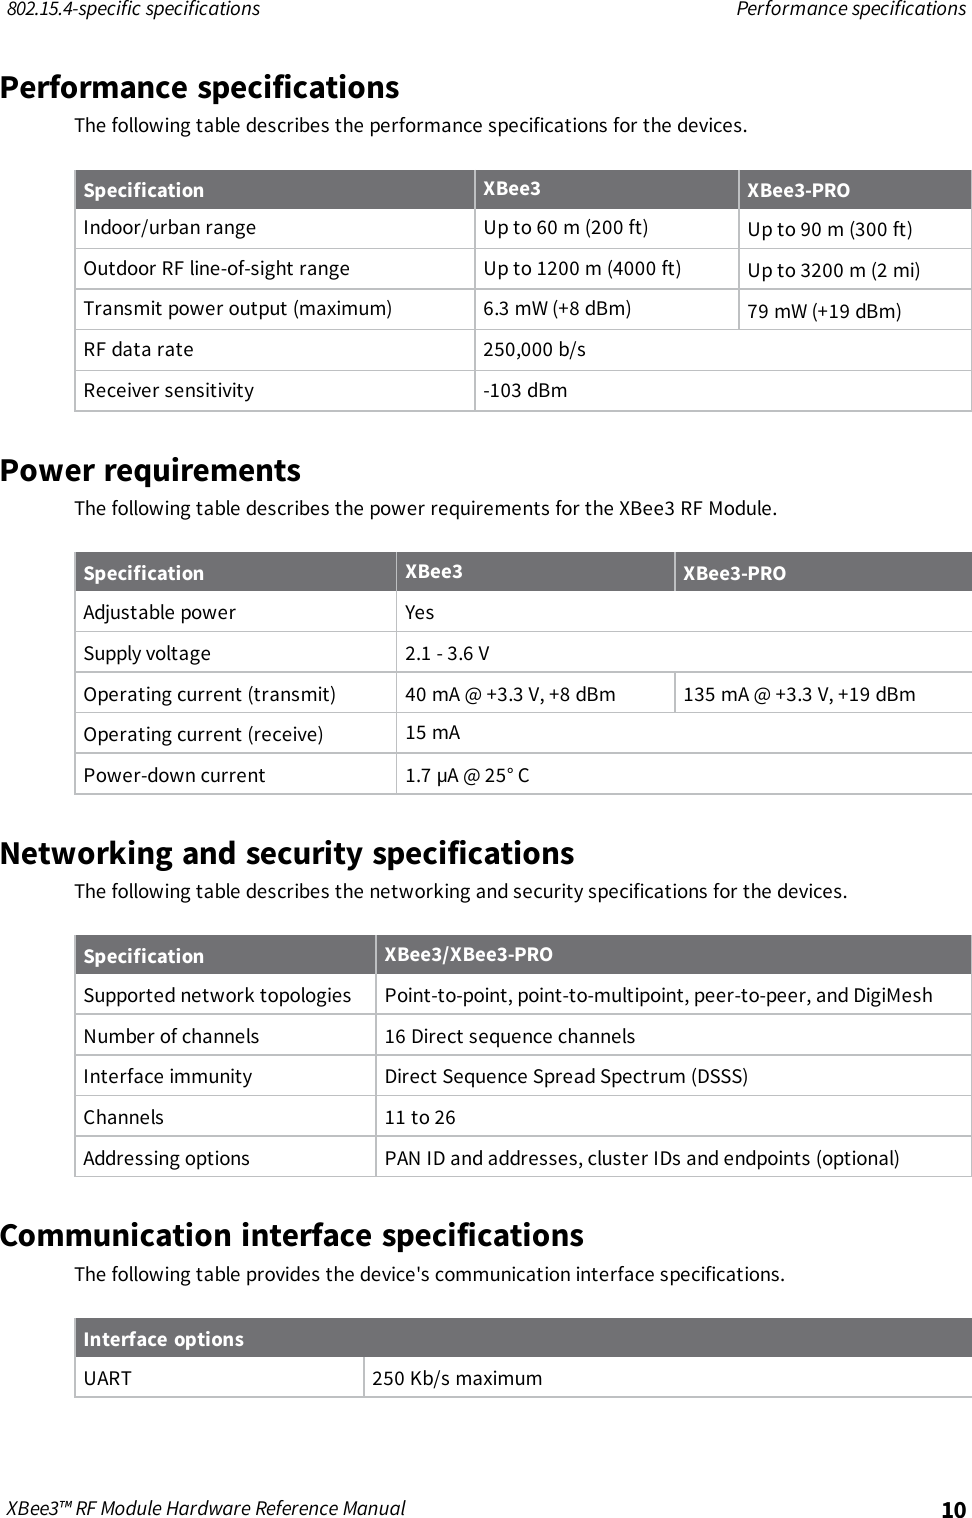 802.15.4-specific specifications Performance specificationsXBee3™ RF Module Hardware Reference Manual 10Performance specificationsThe following table describes the performance specifications for the devices.Specification XBee3 XBee3-PROIndoor/urban range Up to 60 m (200 ft) Up to 90 m (300 ft)Outdoor RF line-of-sight range Up to 1200 m (4000 ft) Up to 3200 m (2 mi)Transmit power output (maximum) 6.3 mW (+8 dBm) 79 mW (+19 dBm)RF data rate 250,000 b/sReceiver sensitivity -103 dBmPower requirementsThe following table describes the power requirements for the XBee3 RF Module.Specification XBee3 XBee3-PROAdjustable power YesSupply voltage 2.1 - 3.6 VOperating current (transmit) 40 mA @ +3.3 V, +8 dBm 135 mA @ +3.3 V, +19 dBmOperating current (receive) 15 mAPower-down current 1.7 µA @ 25° CNetworking and security specificationsThe following table describes the networking and security specifications for the devices.Specification XBee3/XBee3-PROSupported network topologies Point-to-point, point-to-multipoint, peer-to-peer, and DigiMeshNumber of channels 16 Direct sequence channelsInterface immunity Direct Sequence Spread Spectrum (DSSS)Channels 11 to 26Addressing options PAN ID and addresses, cluster IDs and endpoints (optional)Communication interface specificationsThe following table provides the device&apos;s communication interface specifications.Interface optionsUART 250 Kb/s maximum